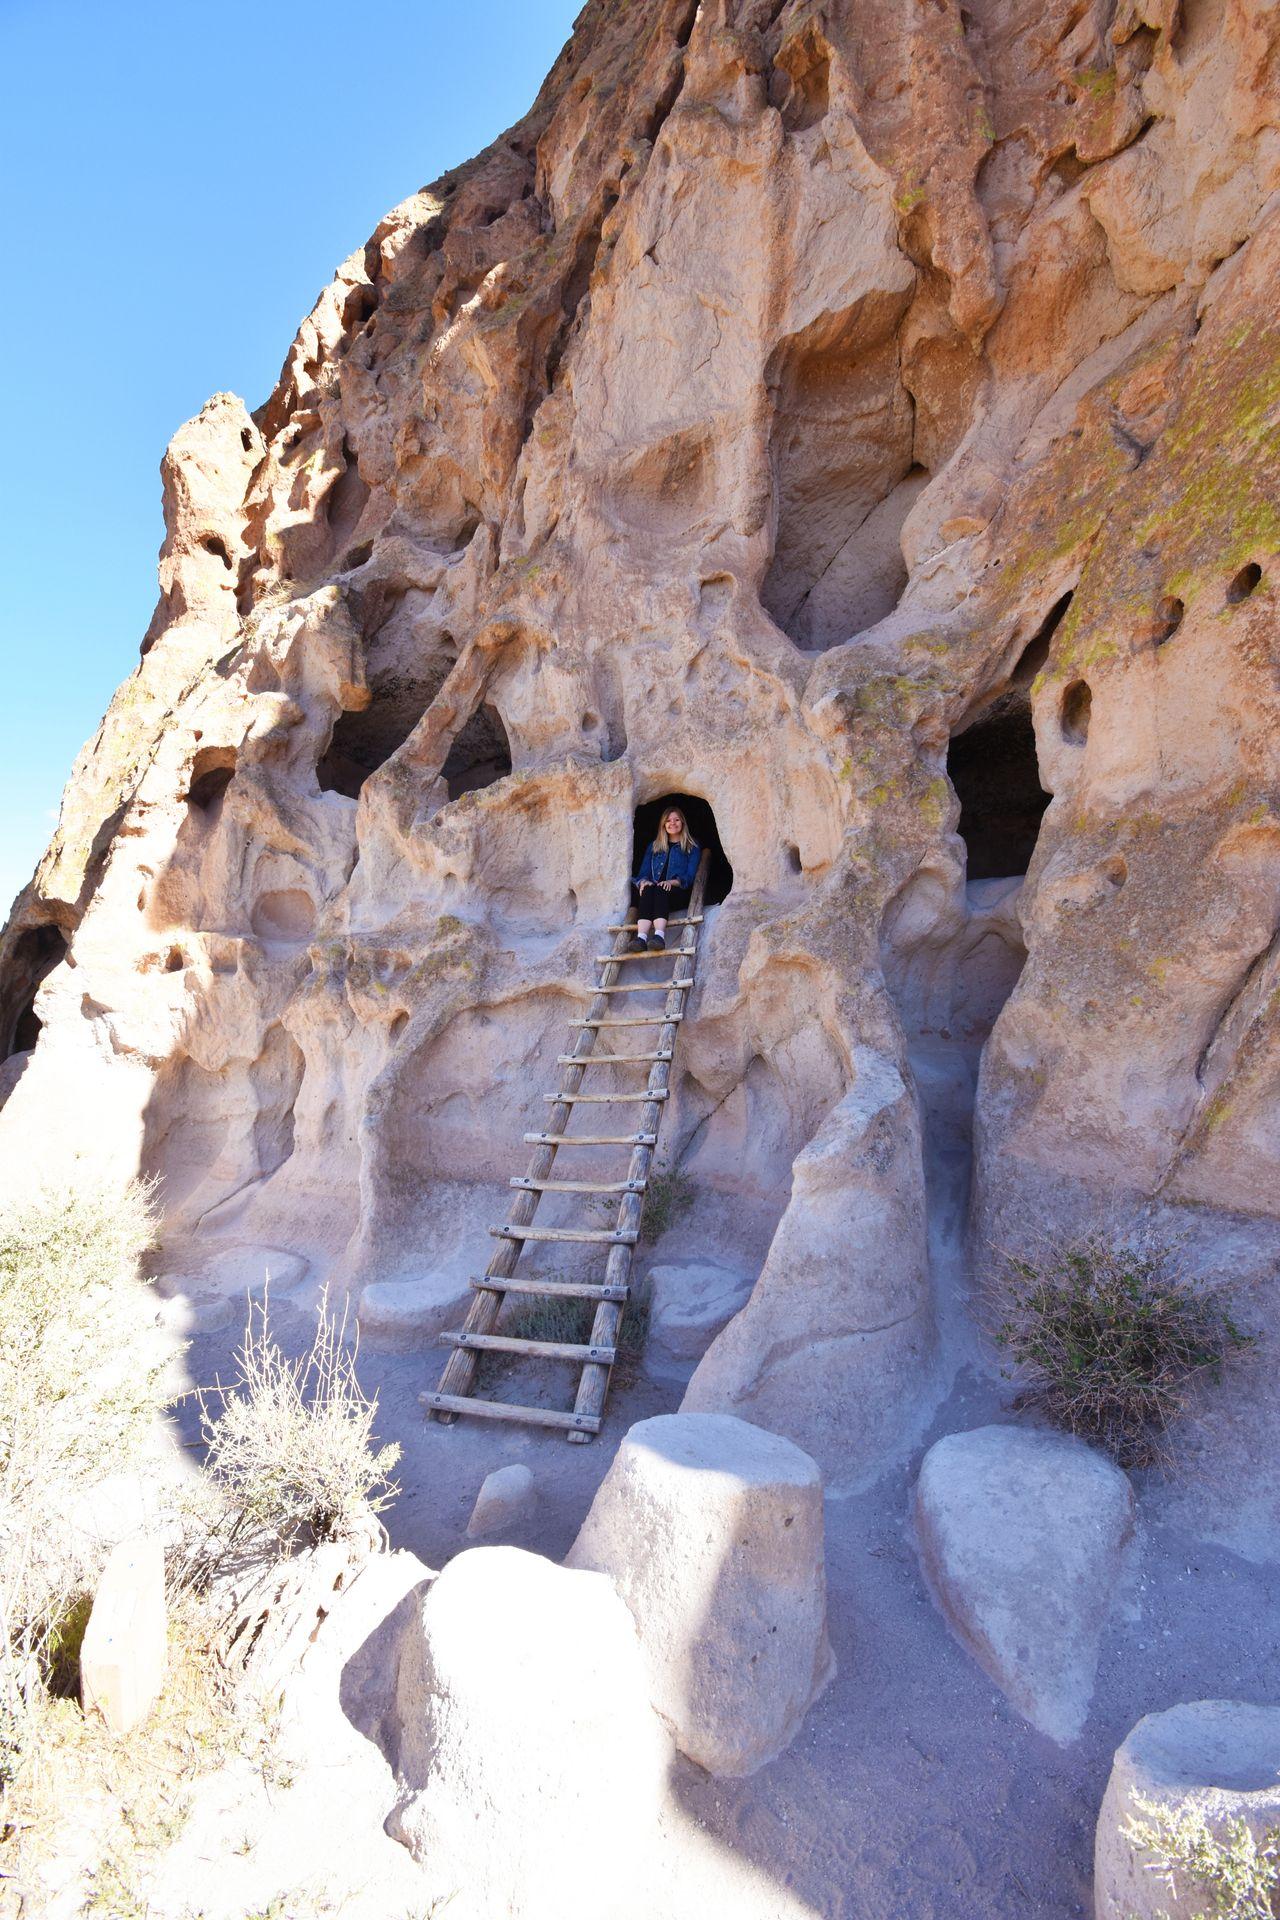 Lydia sitting at the top of a ladder inside a cave dwelling at Bandelier National Monument.